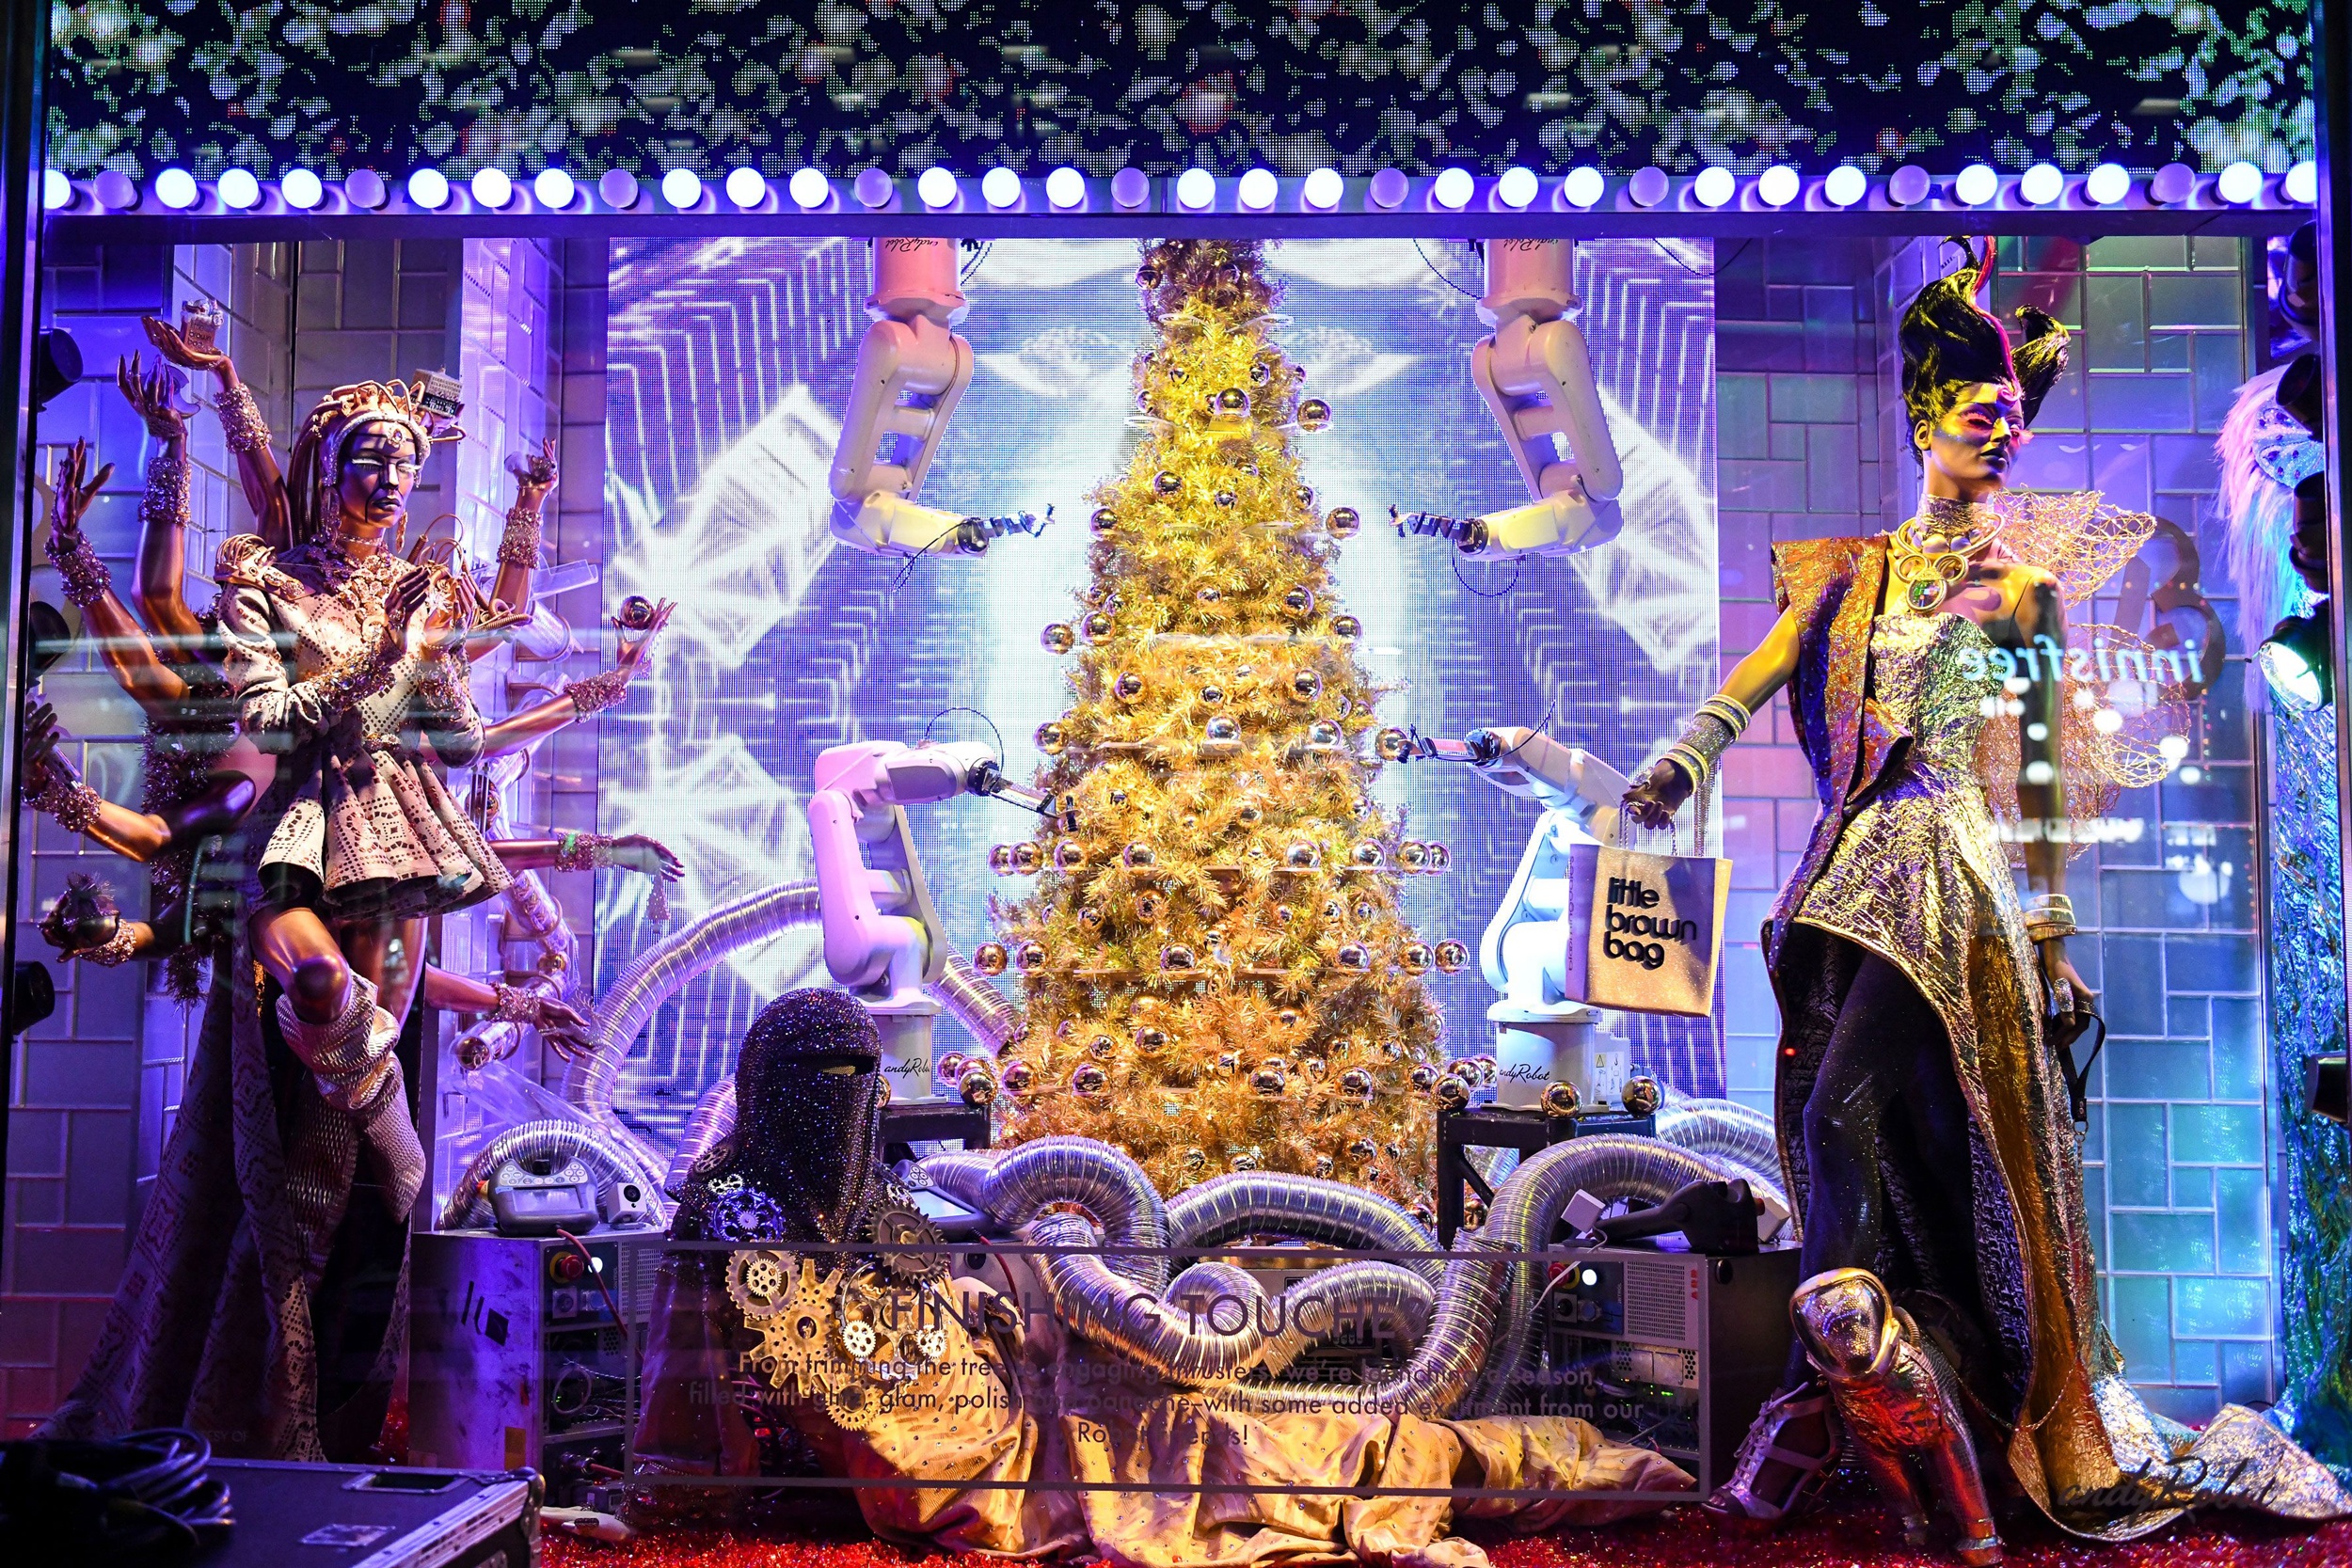 NYC Christmas windows 2019: Guide to the best holiday displays